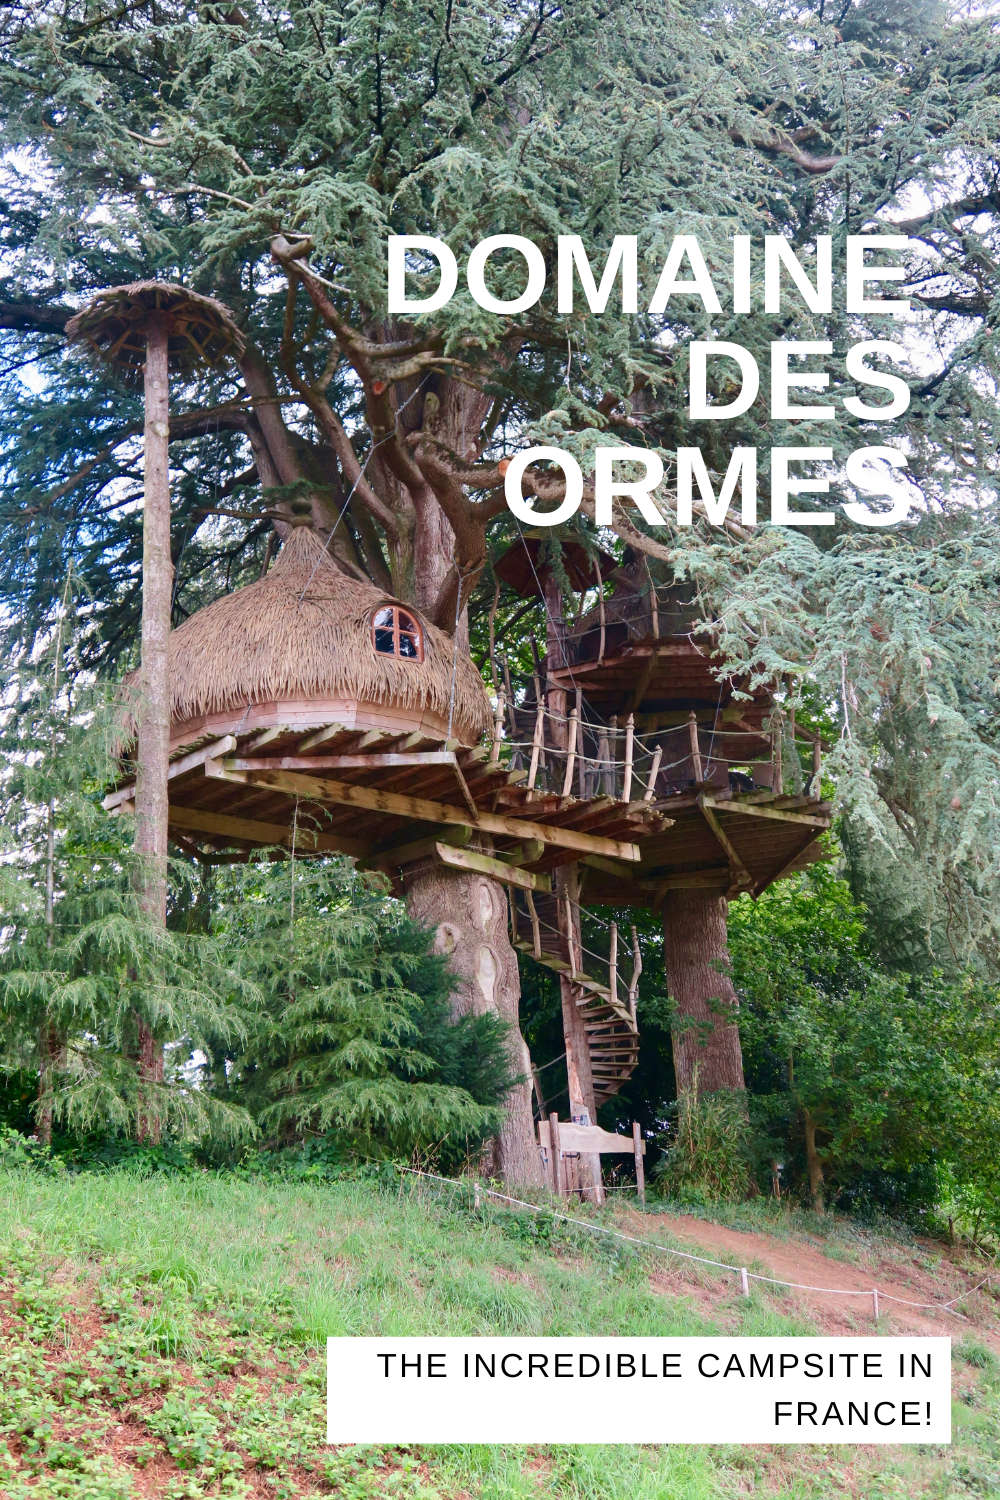 I’m sharing my honest review from our family holiday to Domaine des Ormes campsite in Brittany, France.